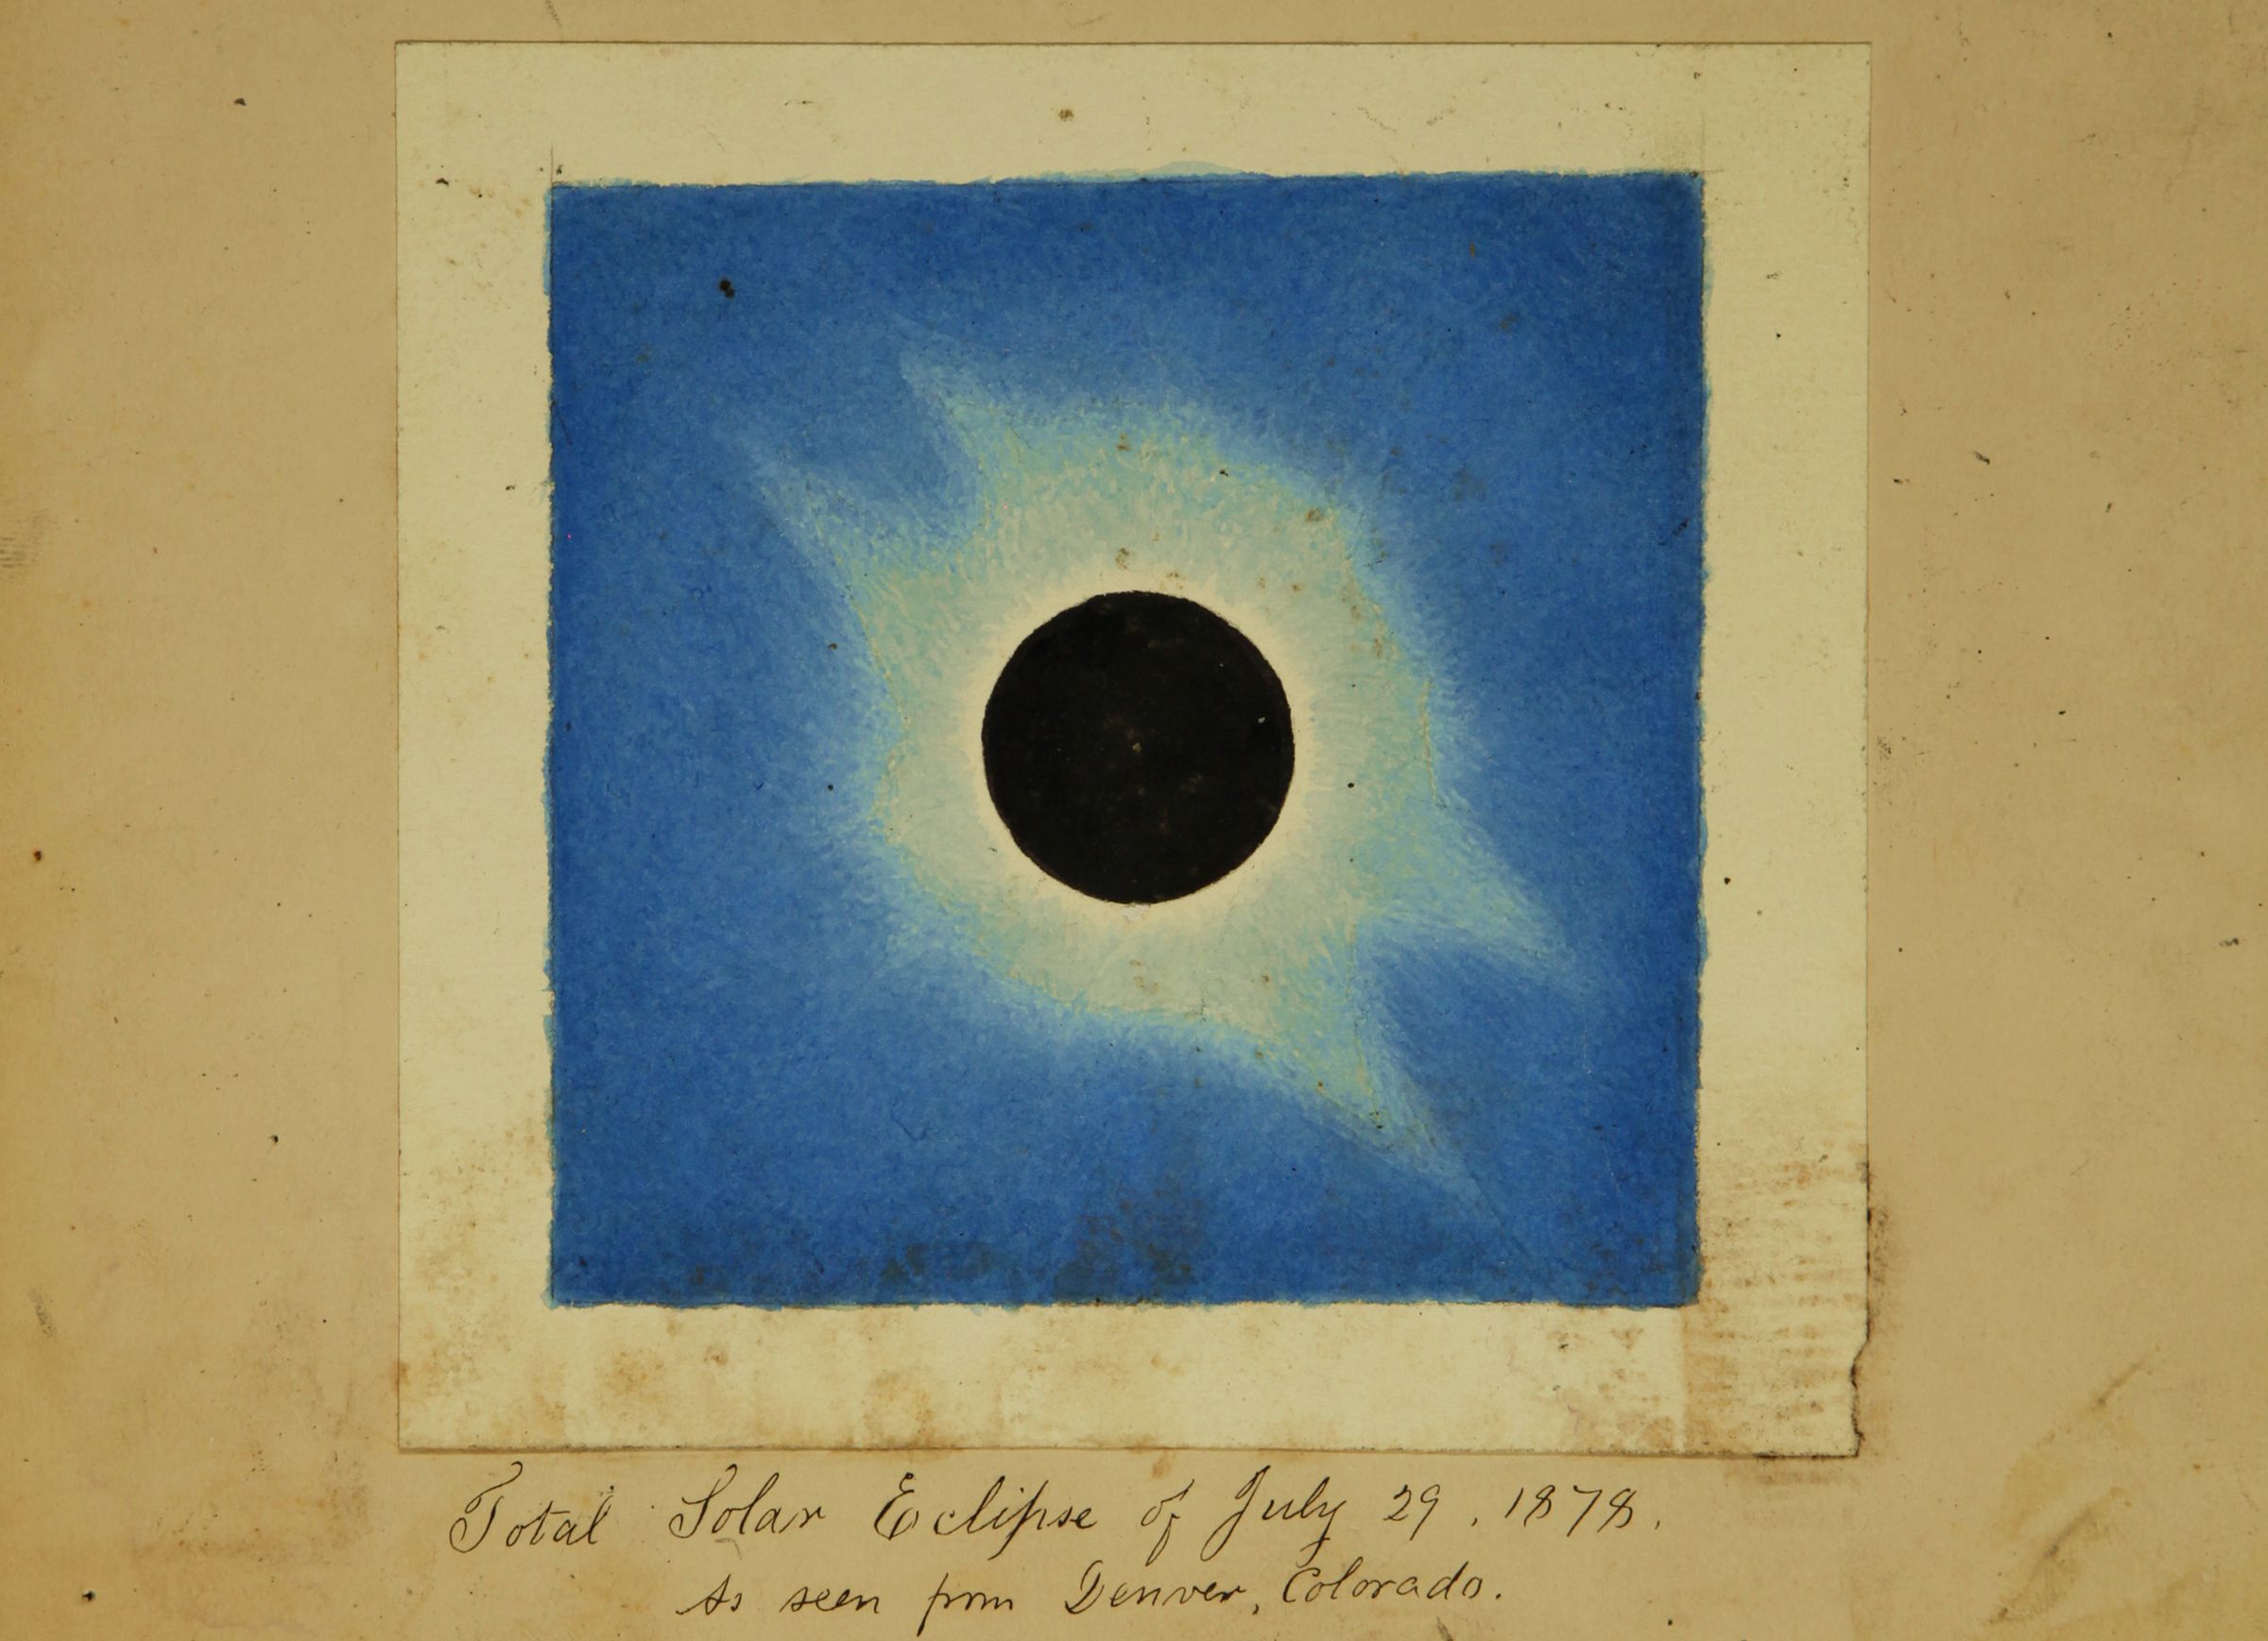 Watercolor of the solar corona as seen at Denver in 1878 by George W. Hill, an assistant at the Nautical Almanac Office.